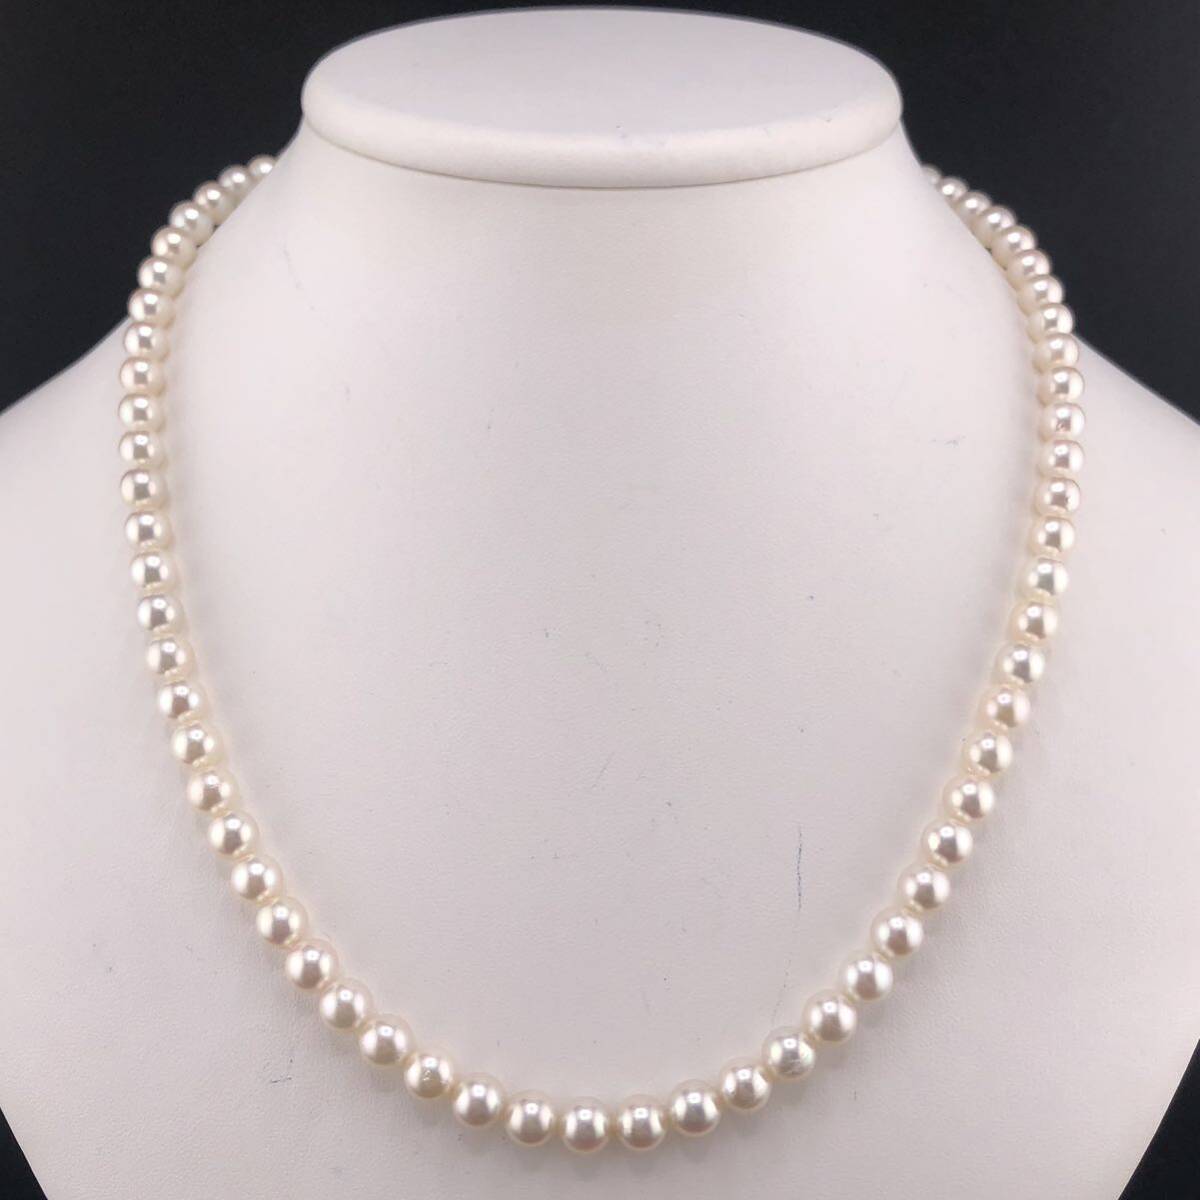 E03-6420 アコヤパールネックレス 6.5mm~7.0mm 49cm 33.8g ( アコヤ真珠 Pearl necklace SILVER )の画像1